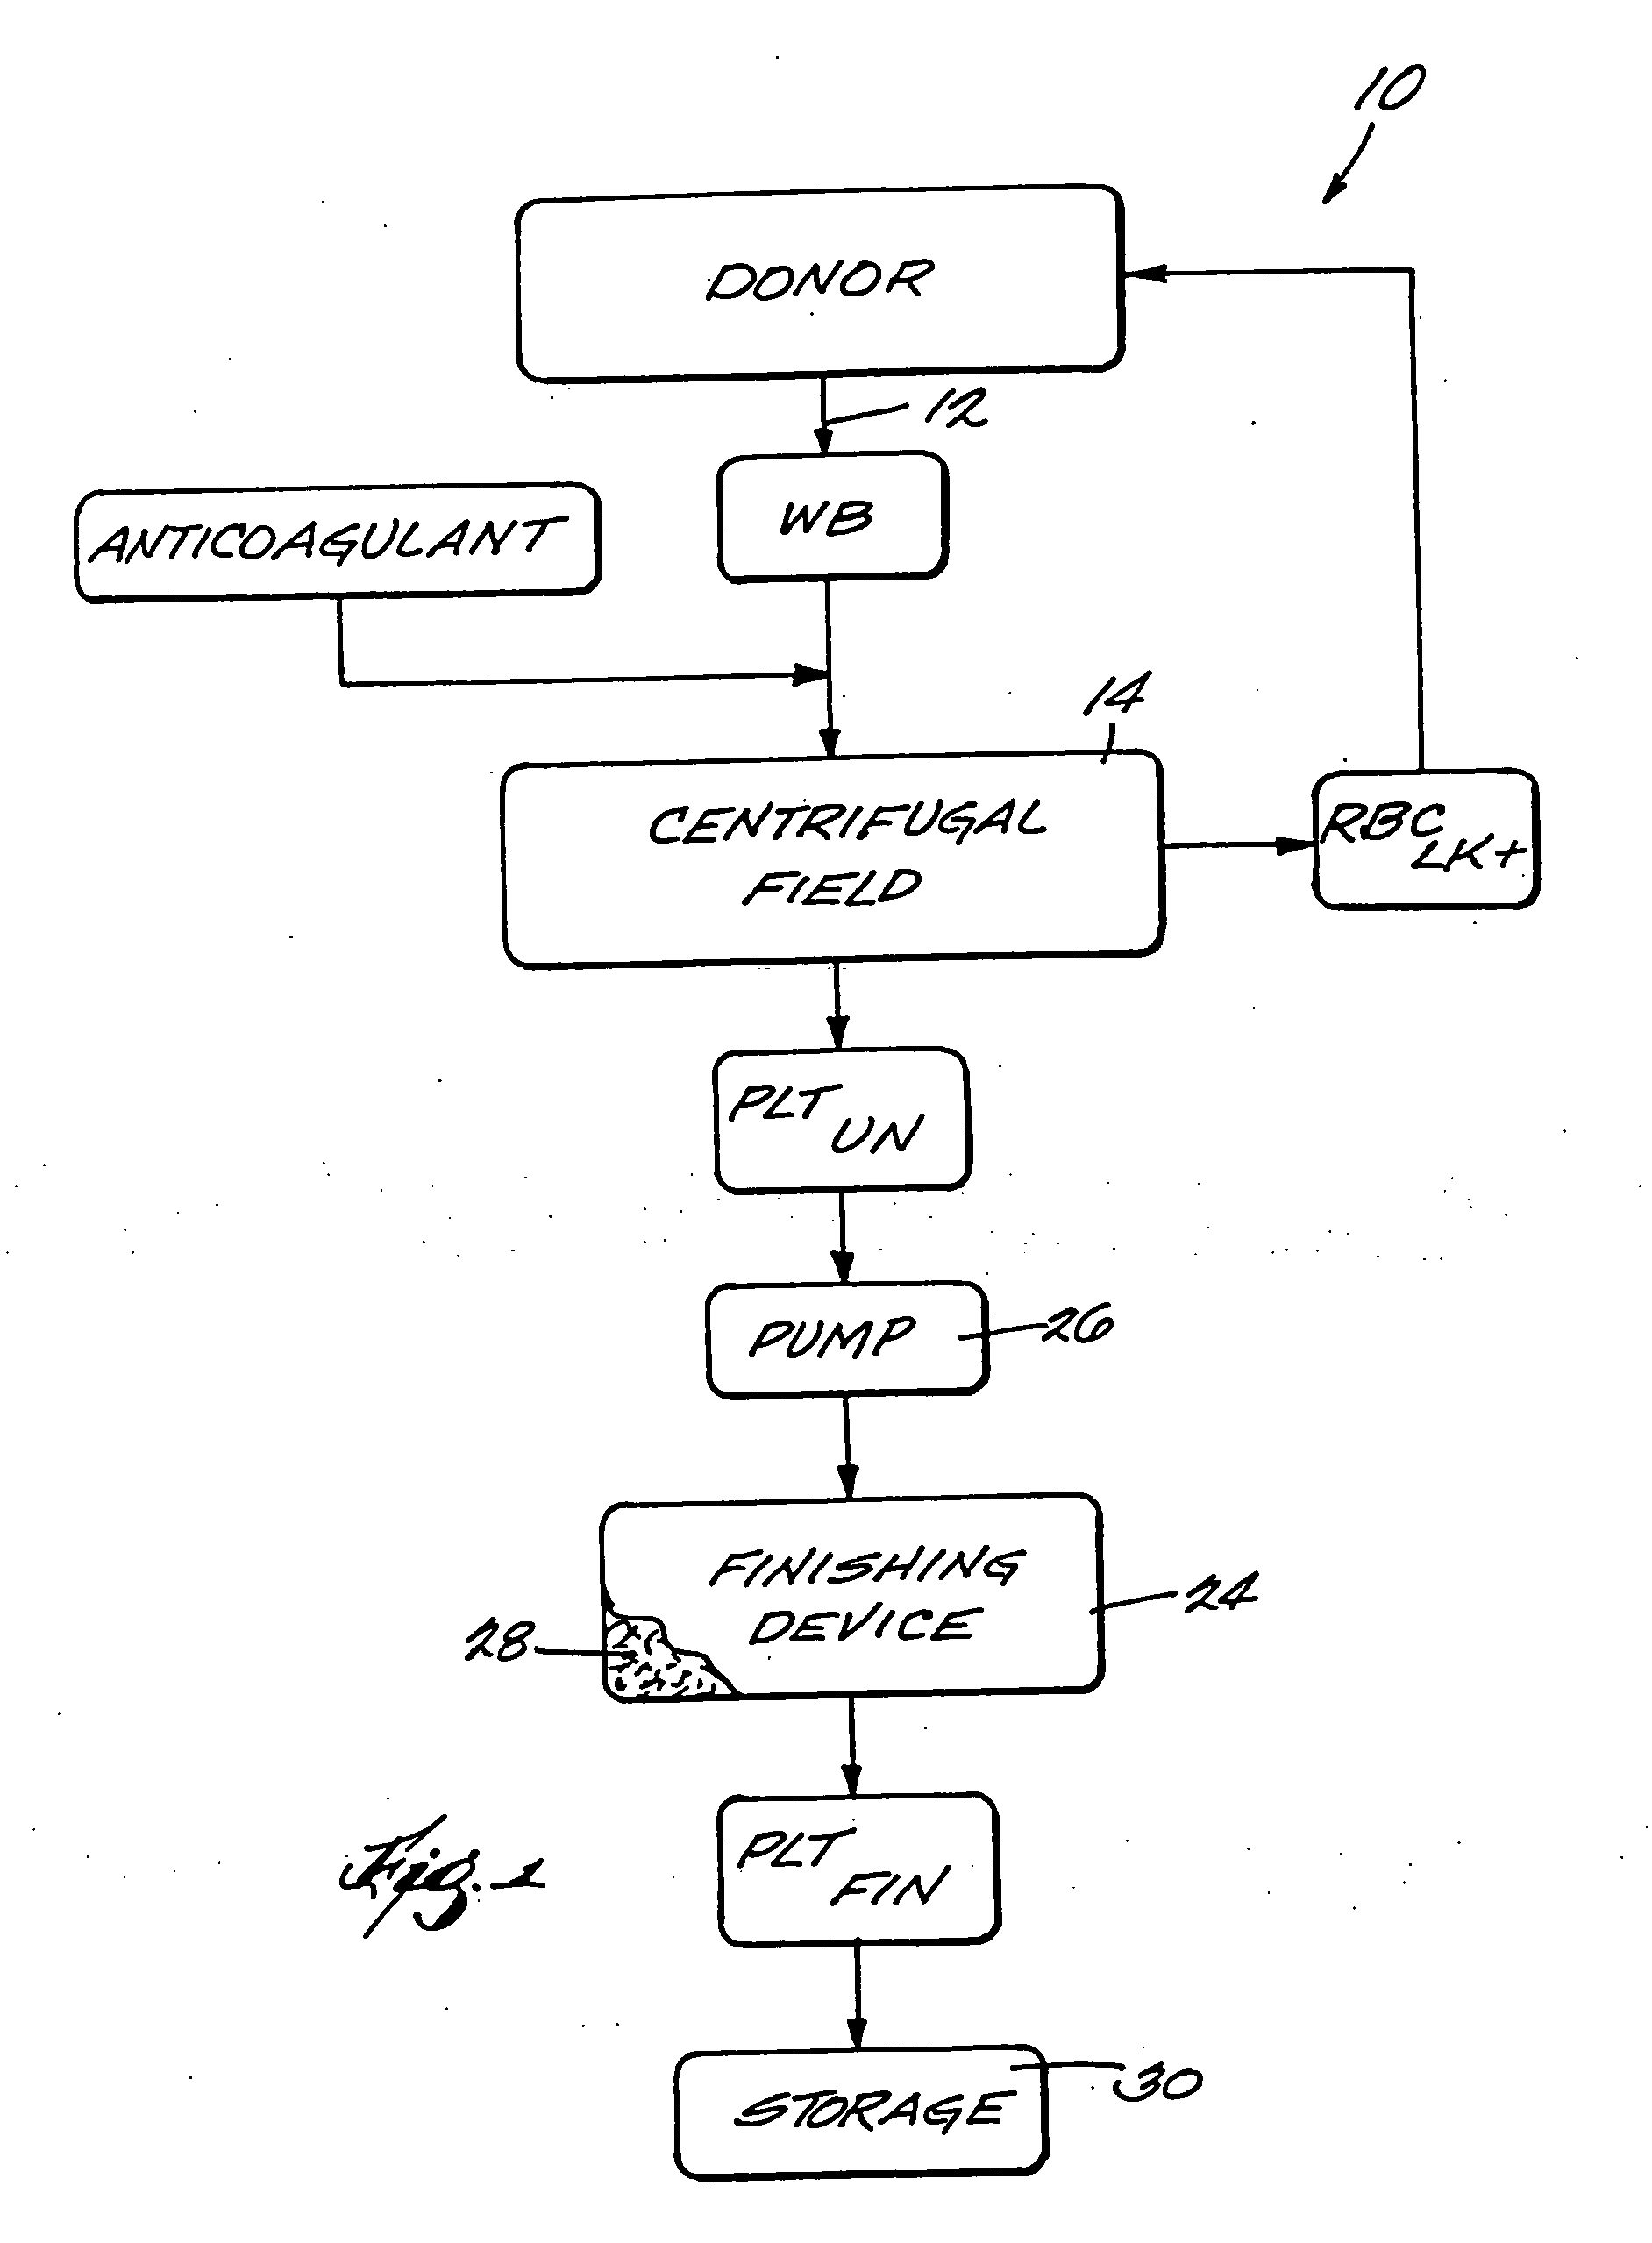 Systems and methods for on line finishing of cellular blood products like platelets harvested for therapeutic purposes